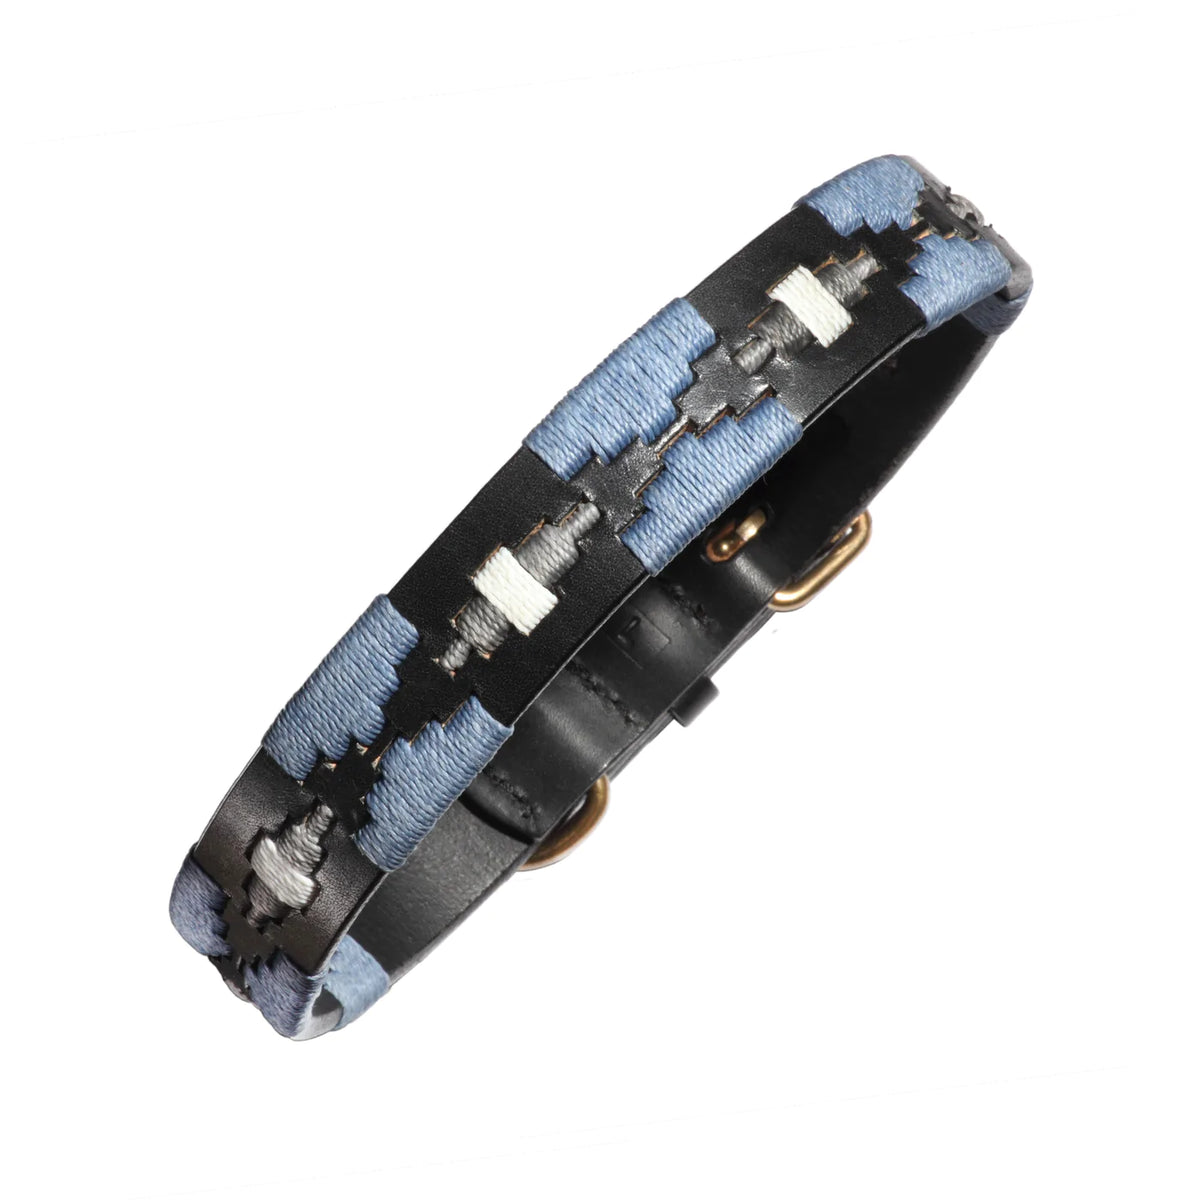 Sierra Dog Collar by Pampeano - Black leather with blue, grey &amp; white